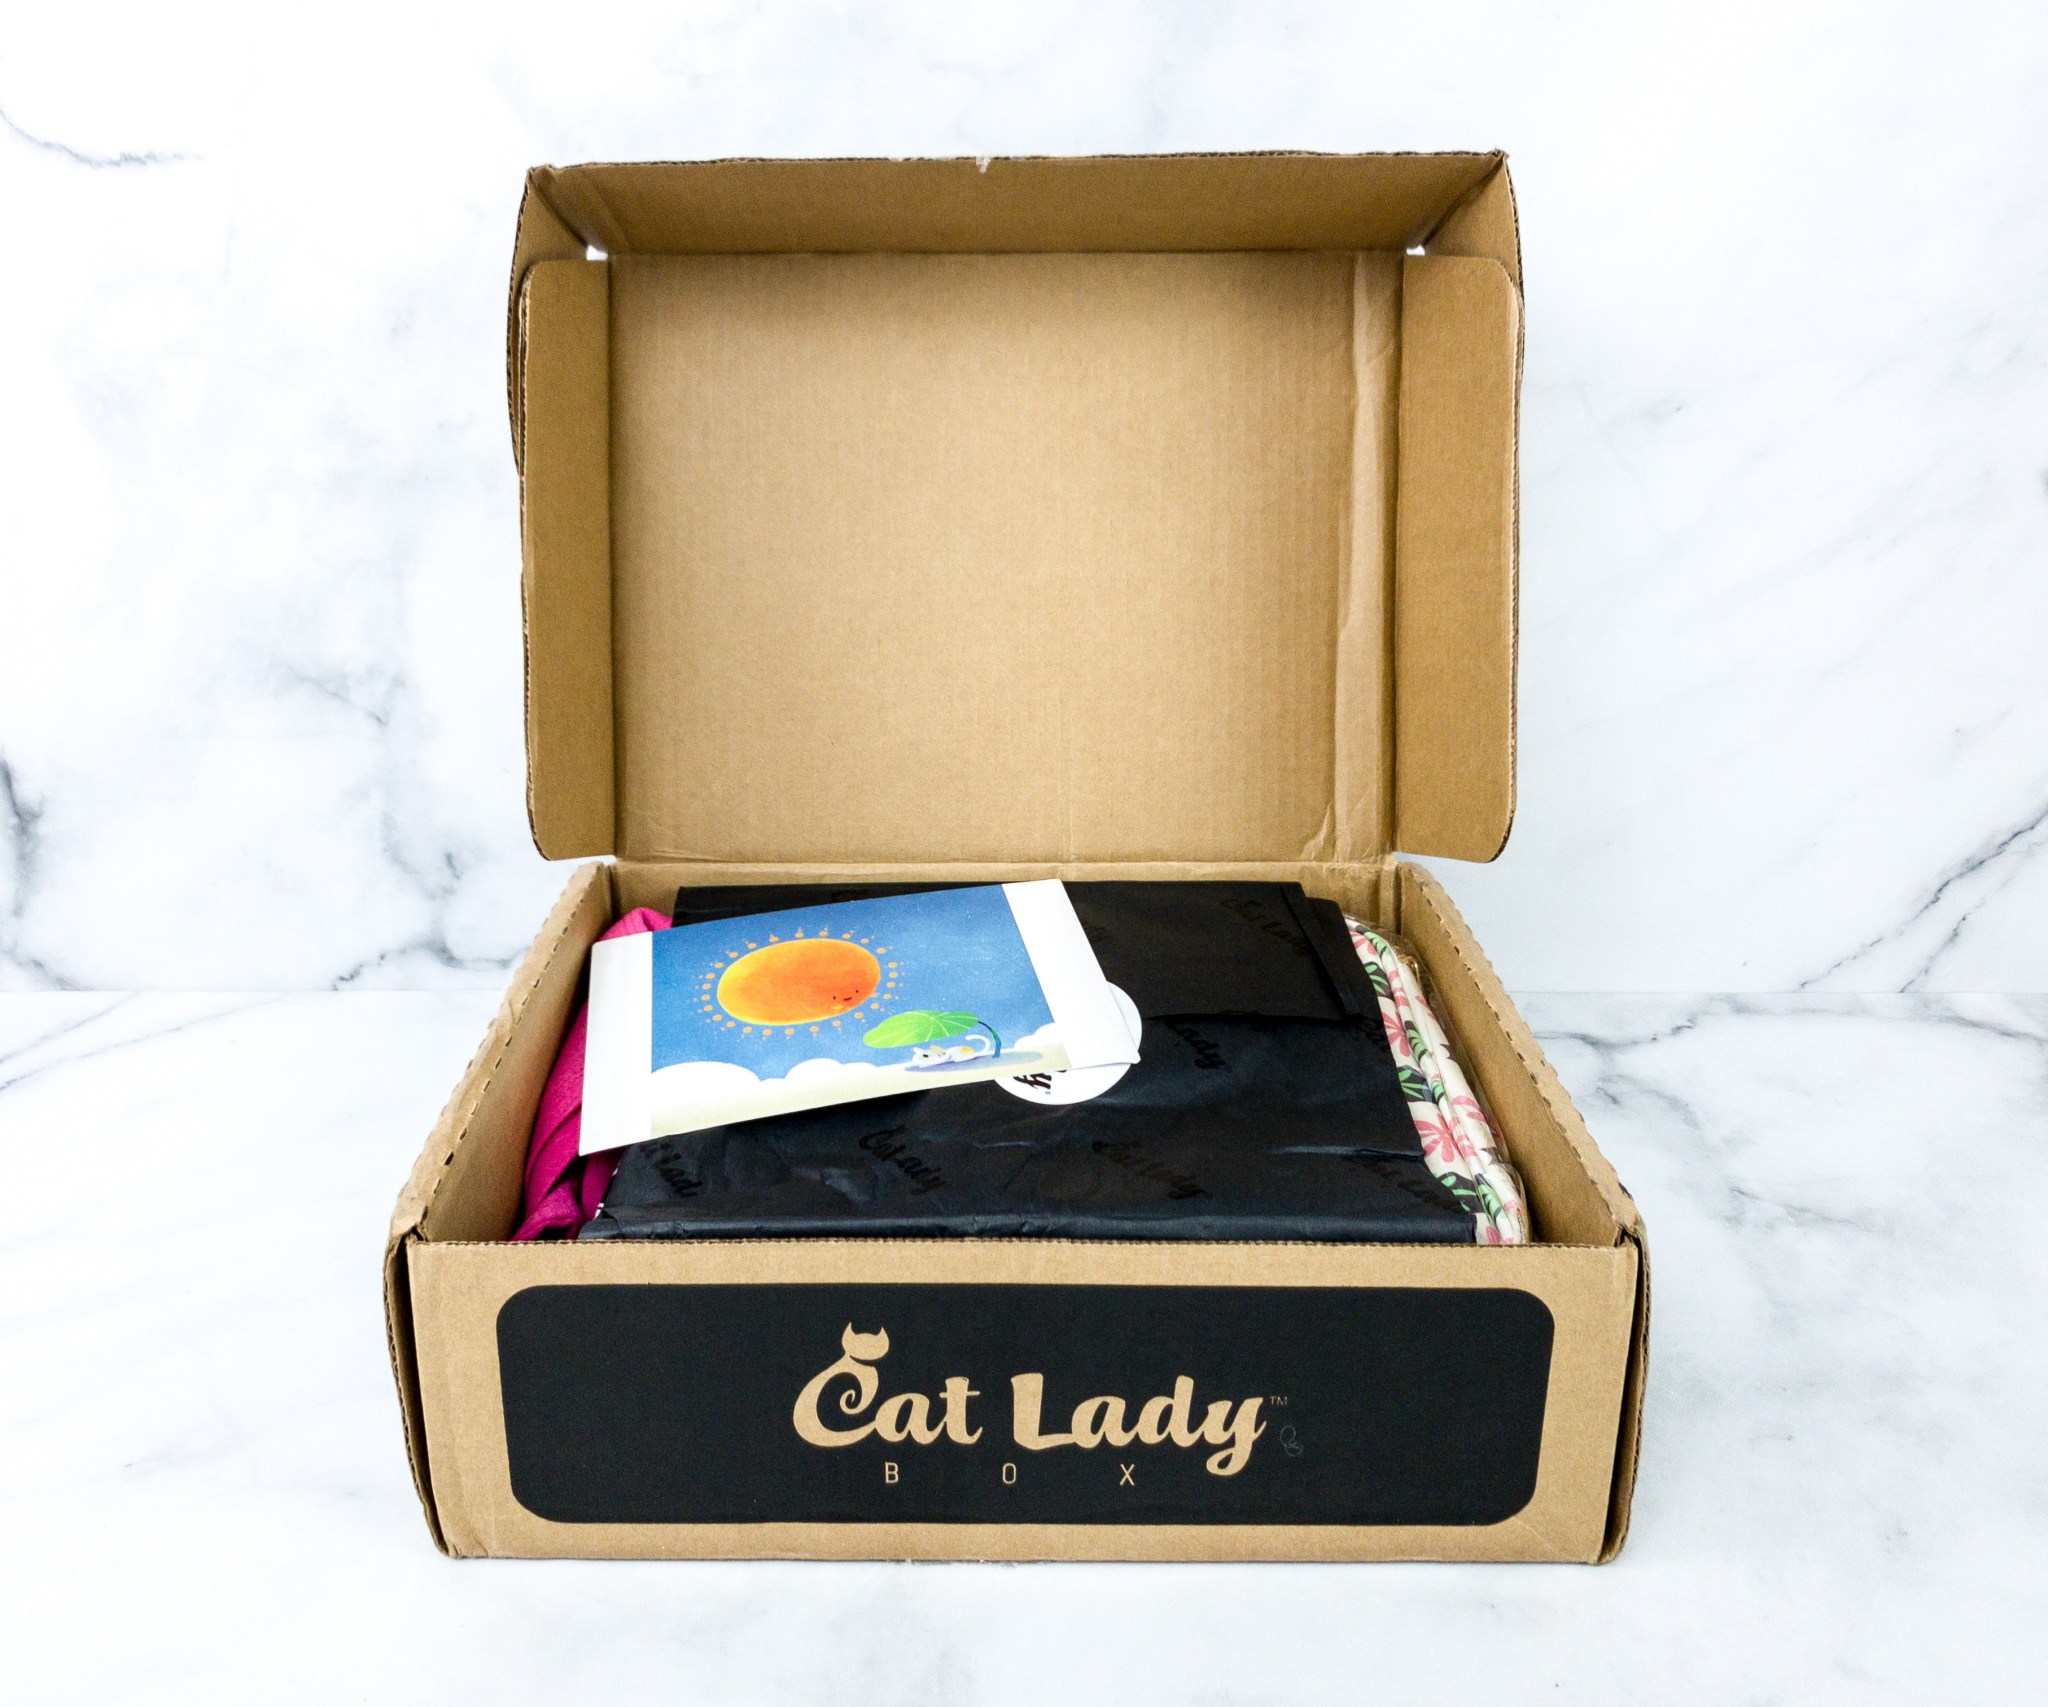 Cat Lady Box July 2020 Subscription Box Review PURR PARADISE Hello